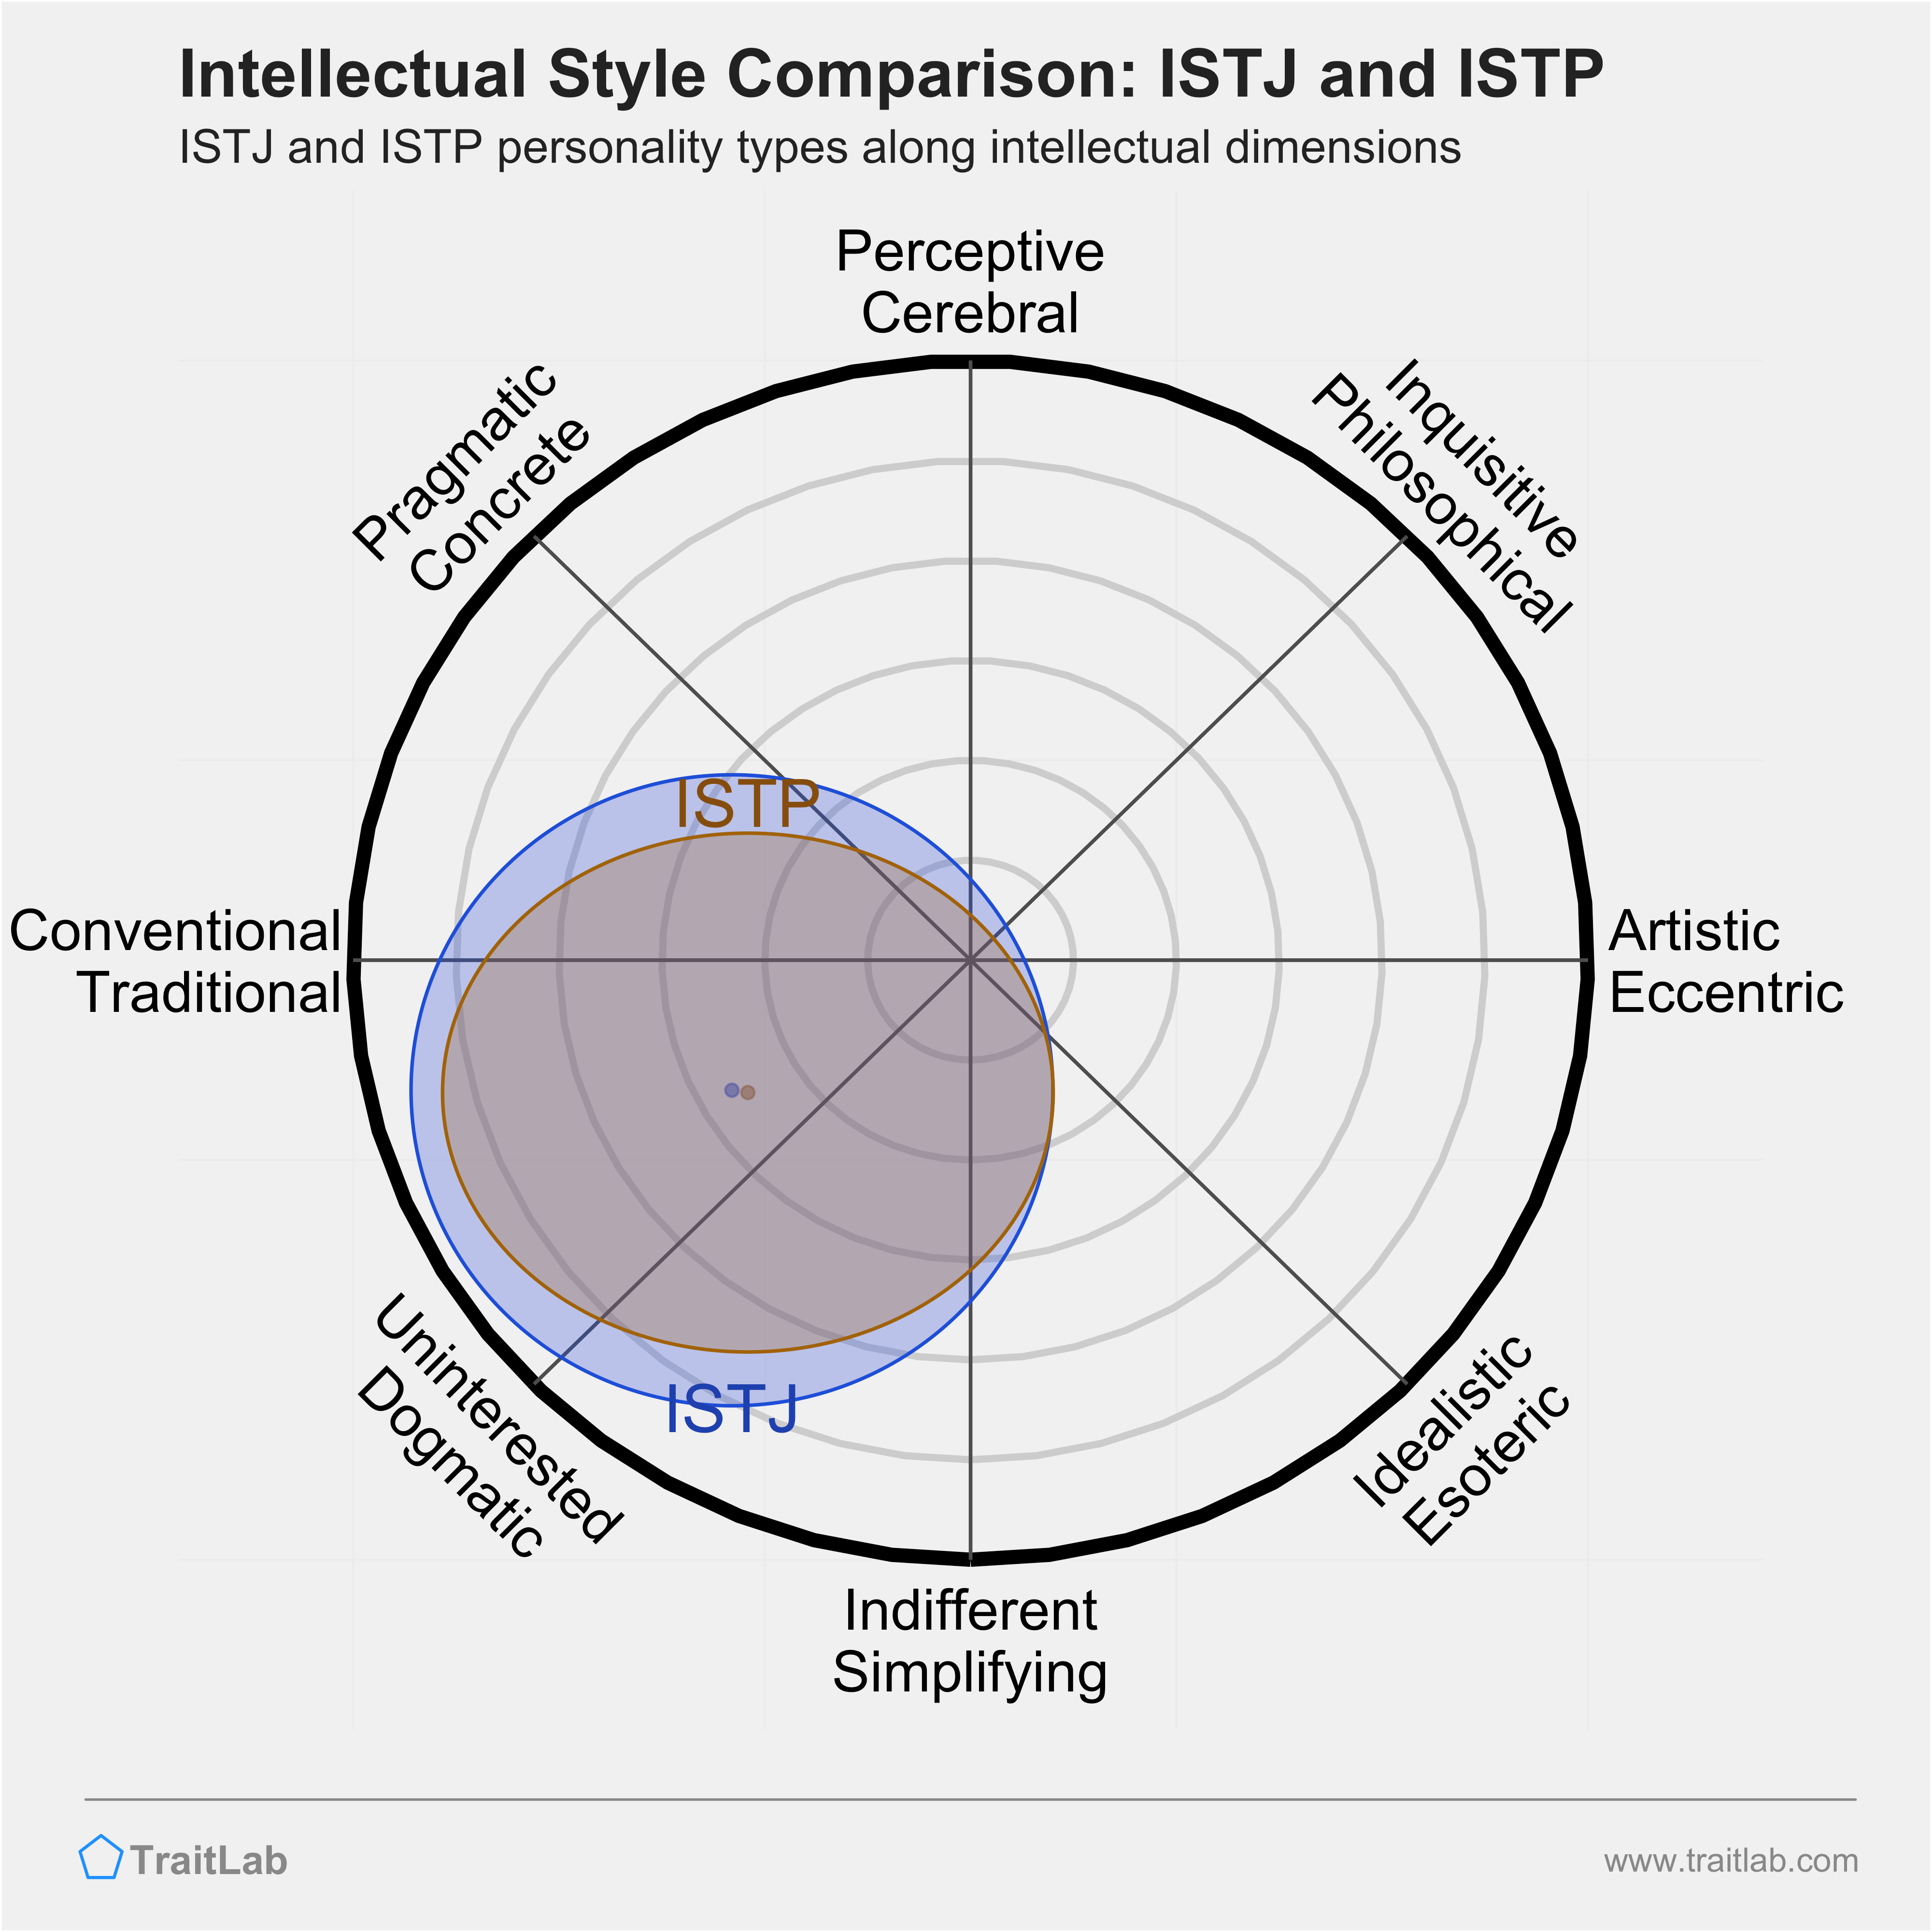 ISTJ and ISTP comparison across intellectual dimensions